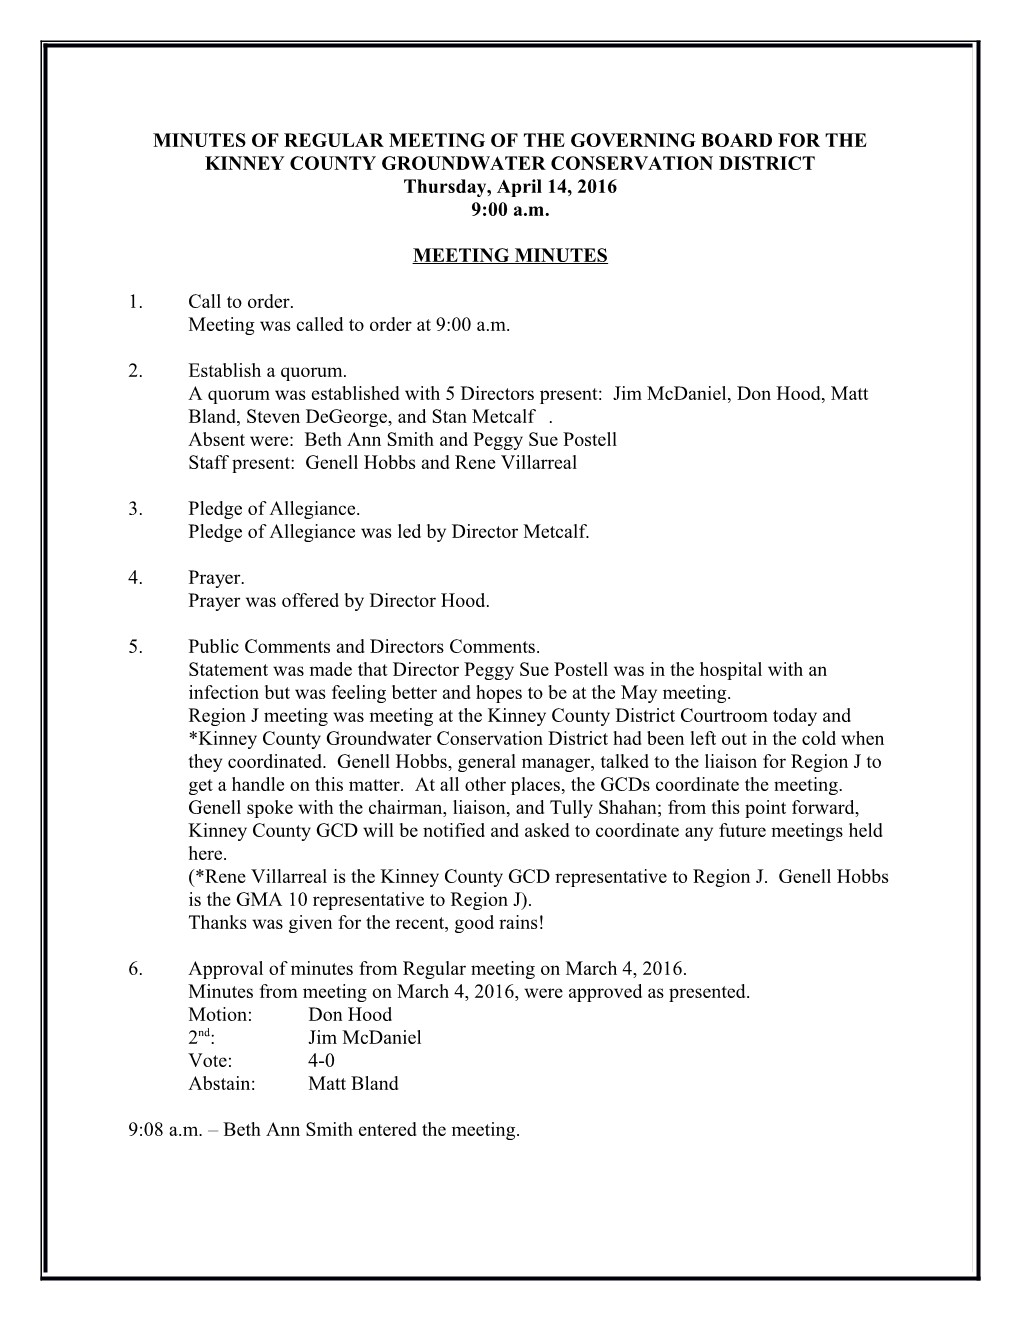 Minutes of Regular Meeting of the Governing Board for the Kinney County Groundwater